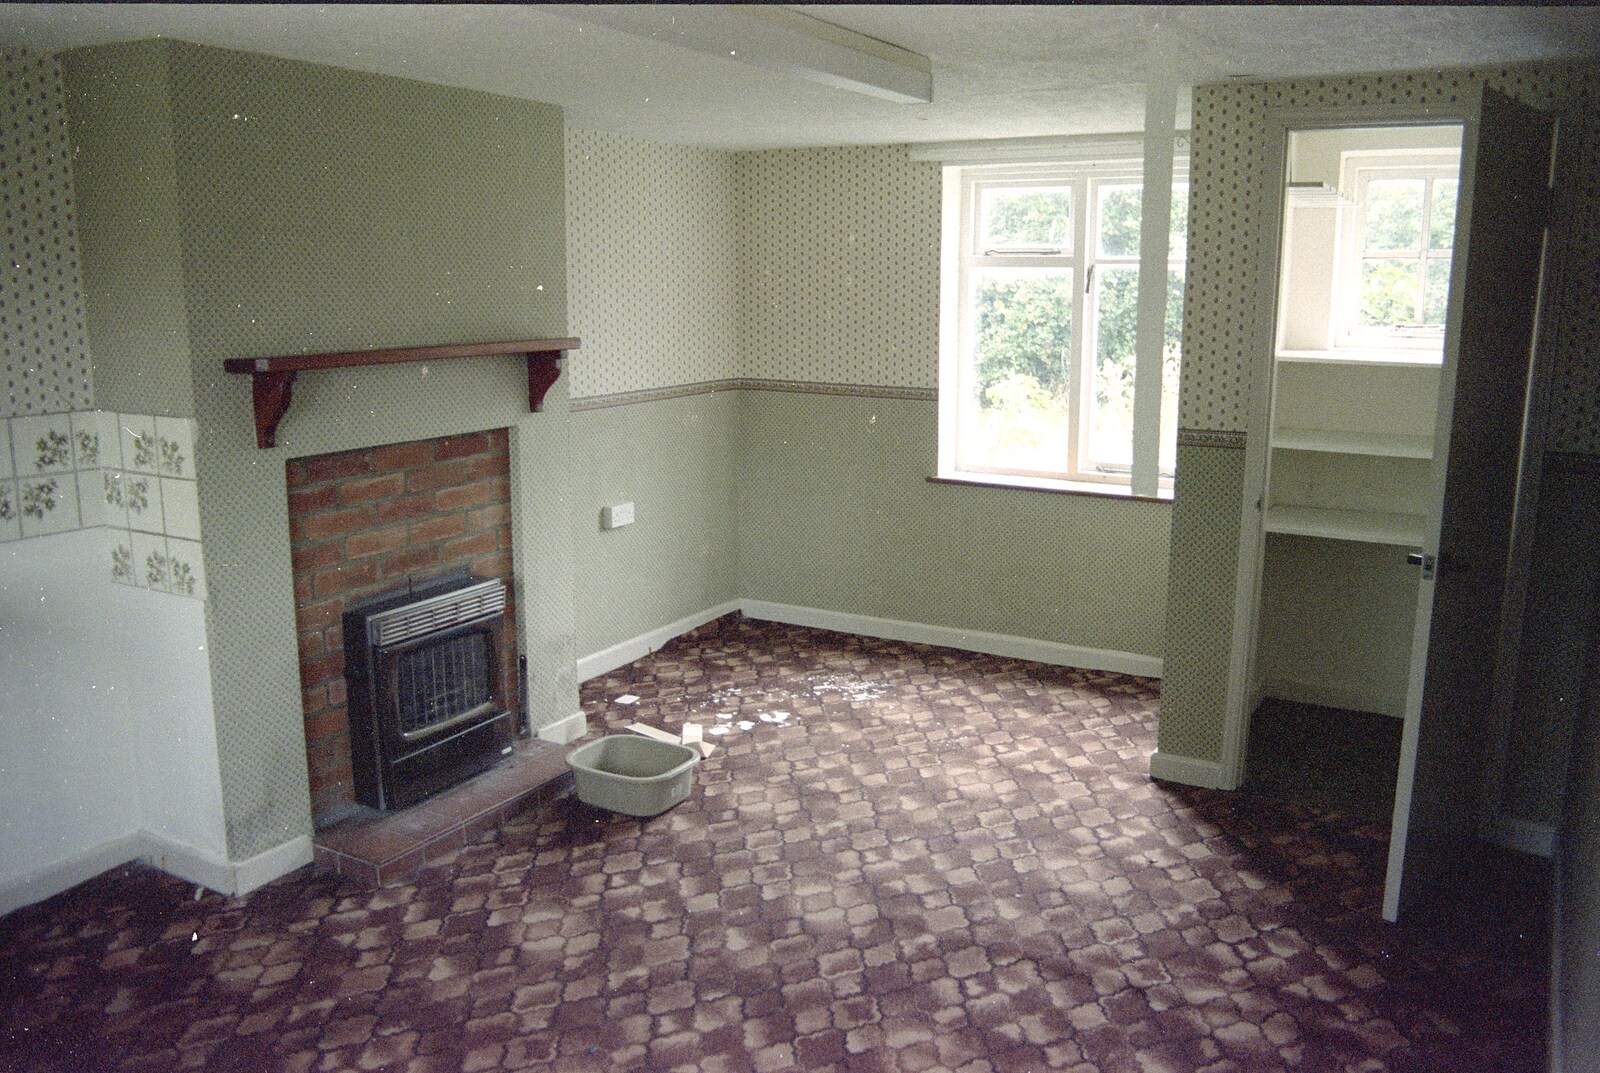 Kitchen, pantry and Parkray fireplace from Moving In, Brome, Suffolk - 10th April 1994